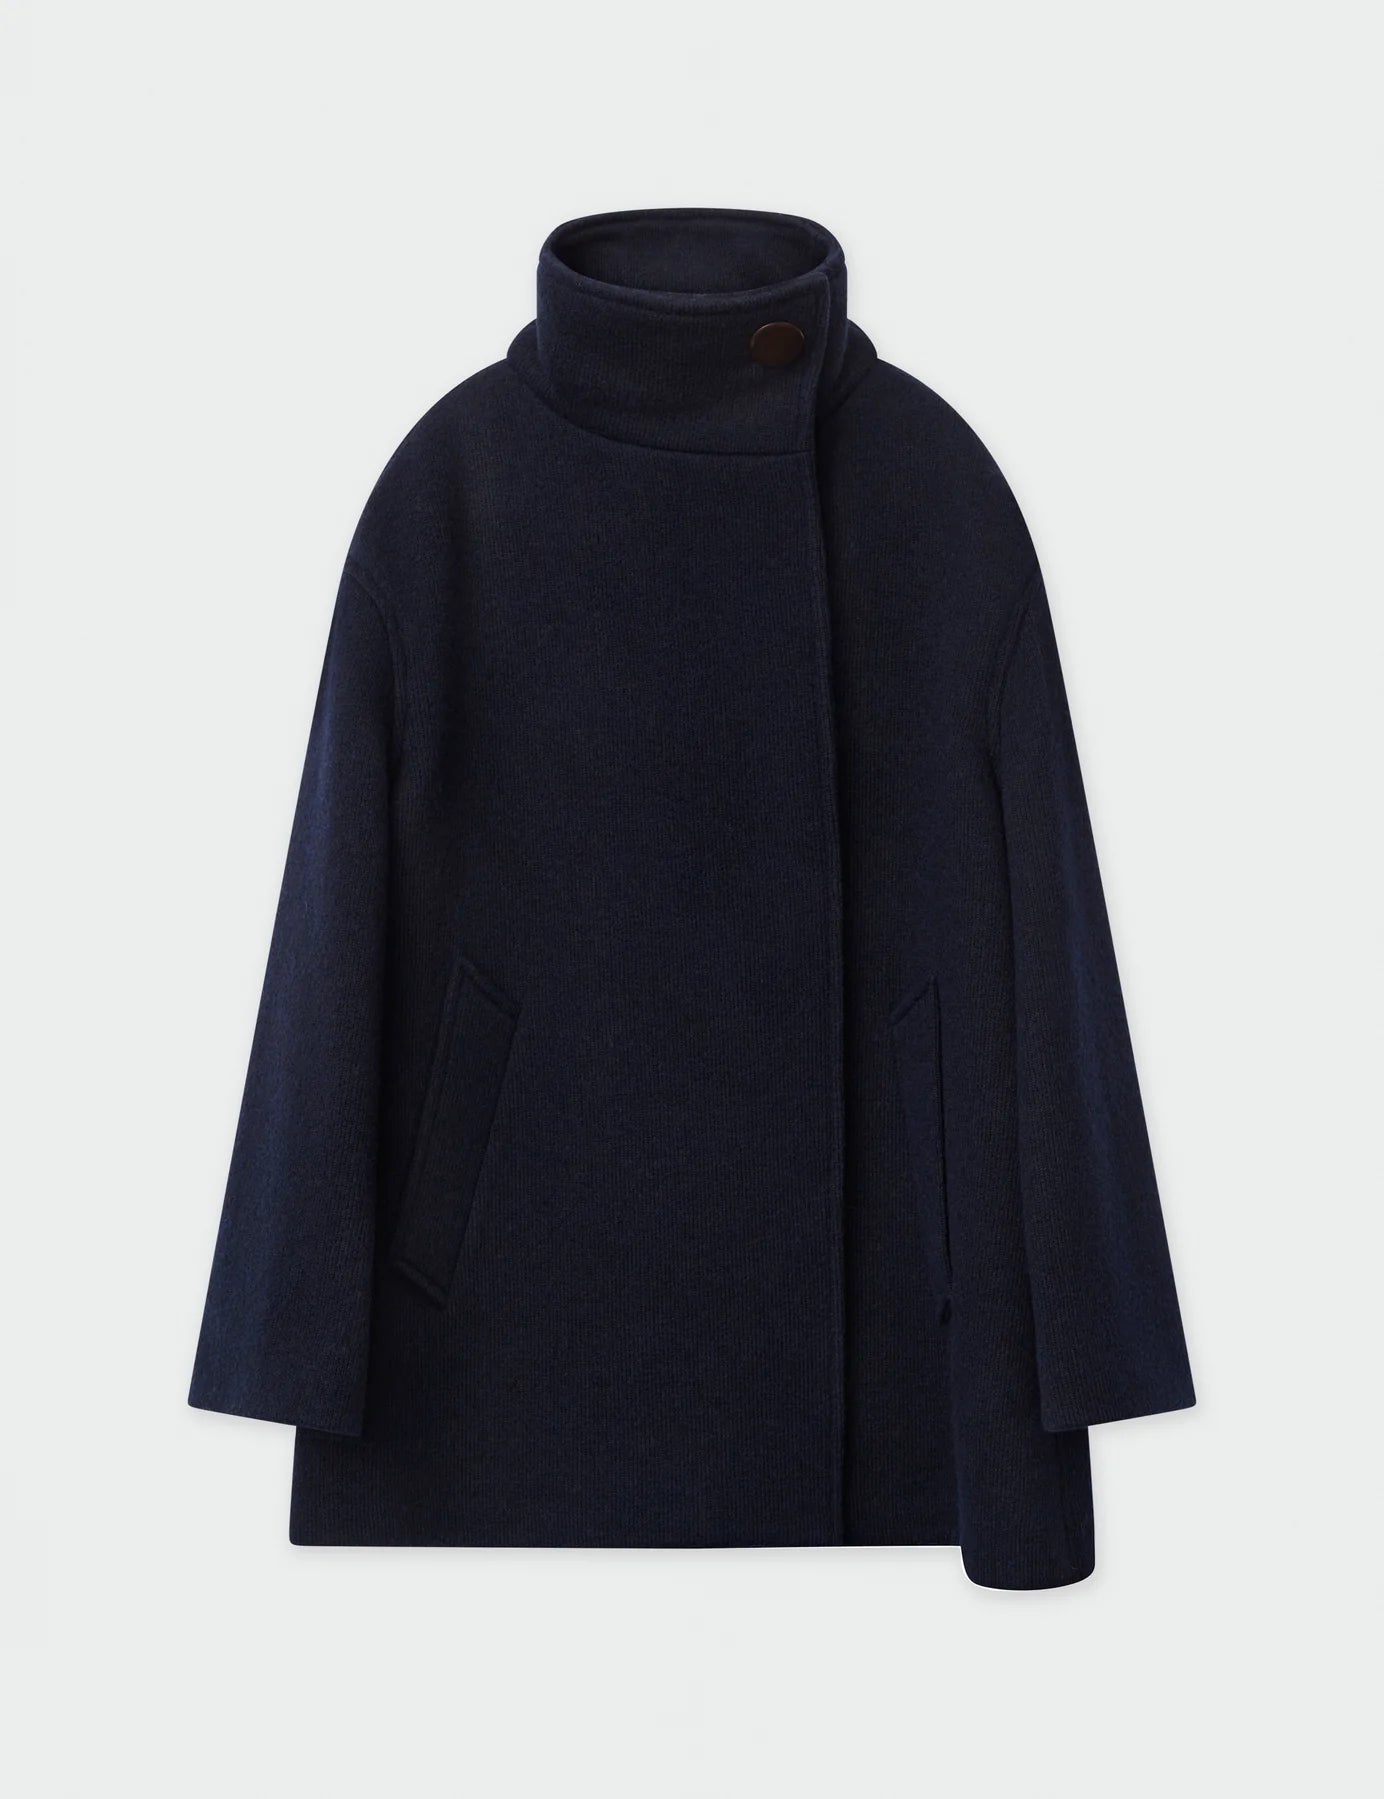 Wool blend navy coat with funnel neck and button fastening with long sleeves, relaxed look